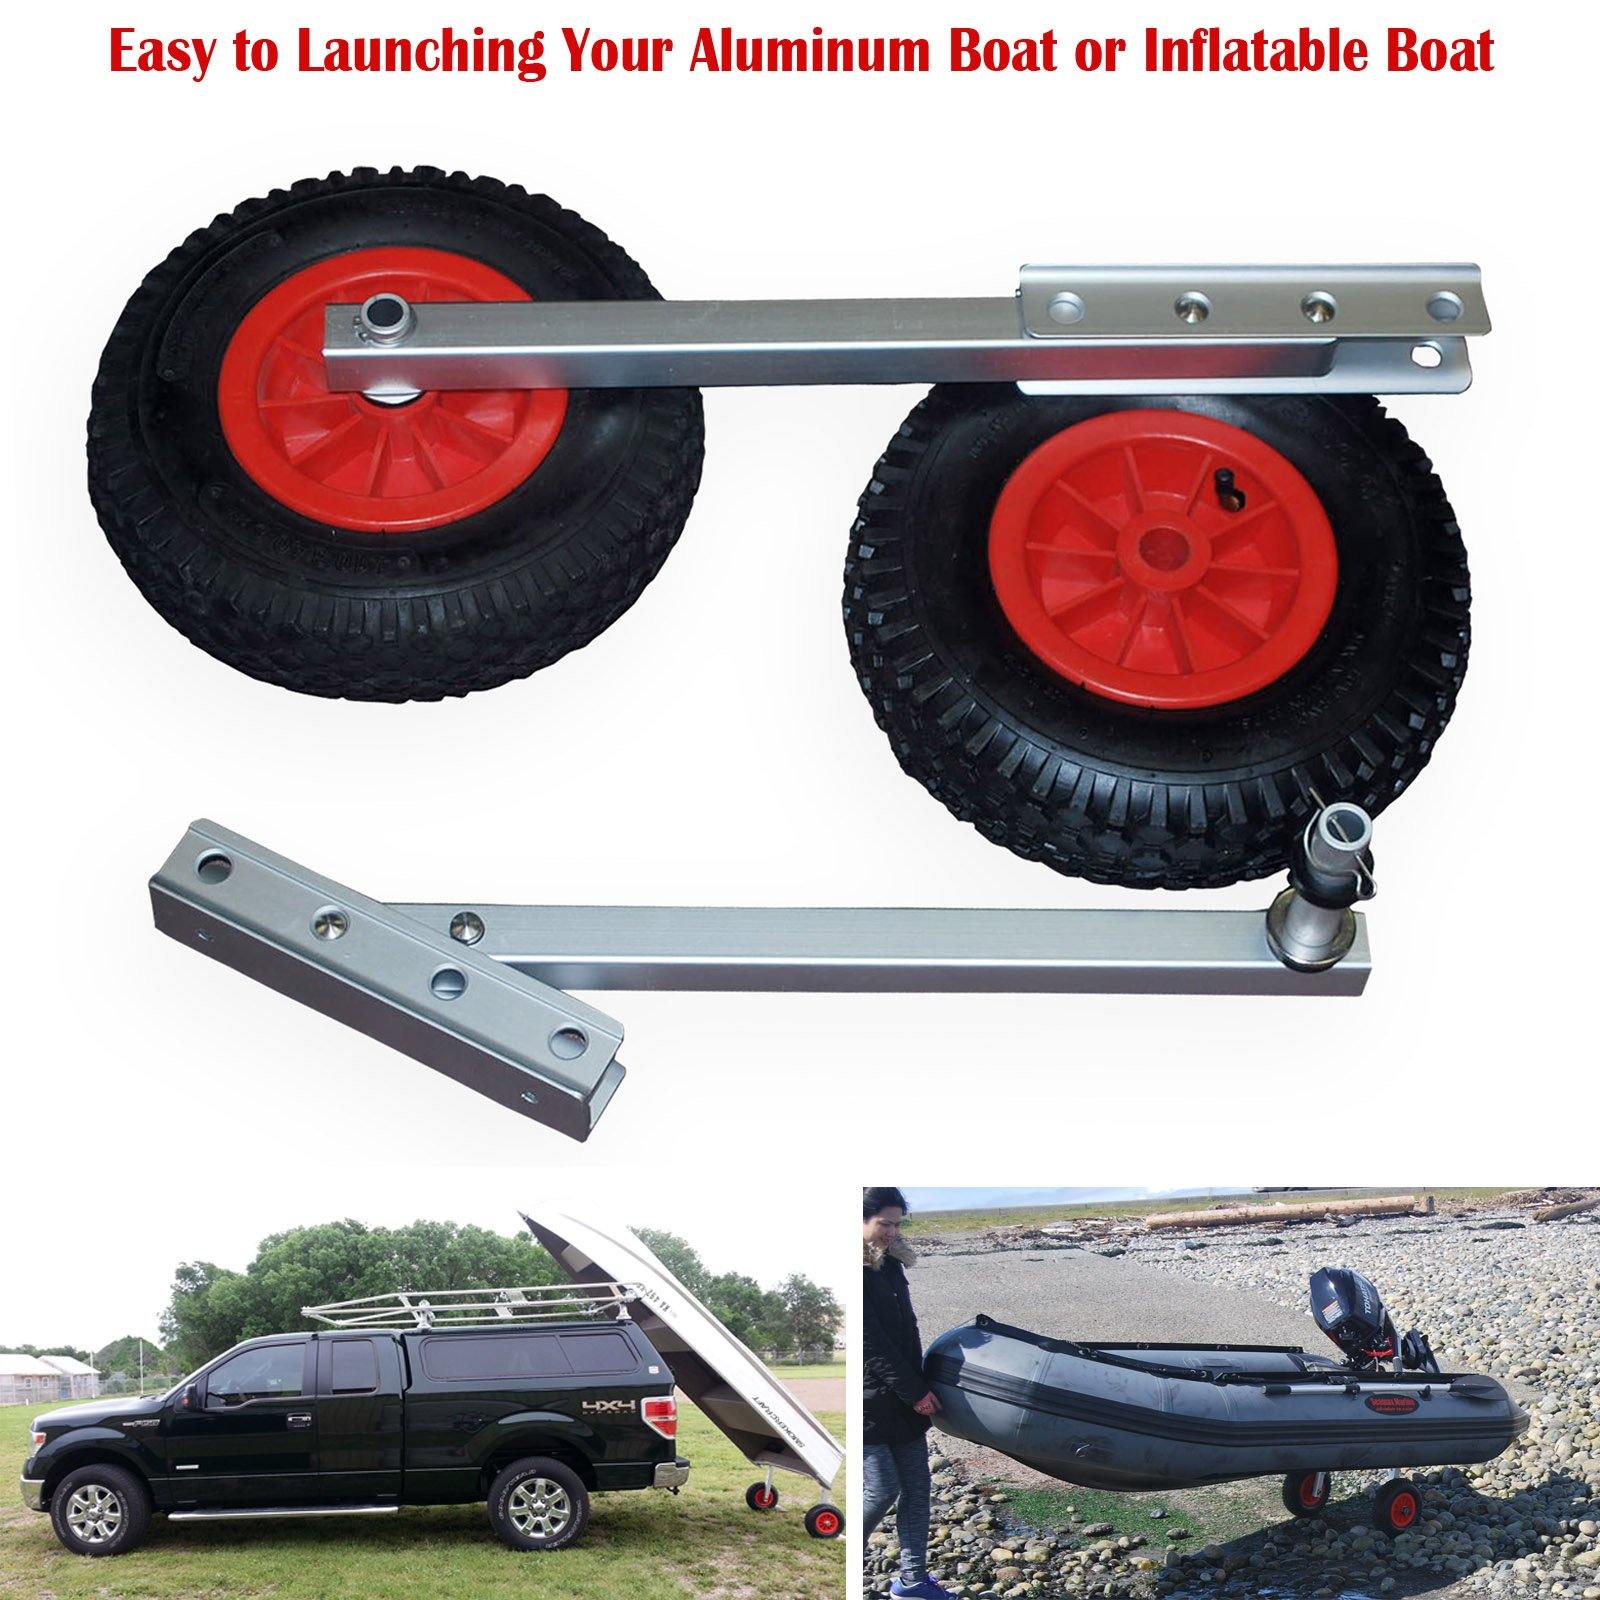 Easy-Load Boat Launching Wheels Set for Inflatable Boat and Aluminum Boat, 2 Height Positions, 12" Pneumatic Wheels